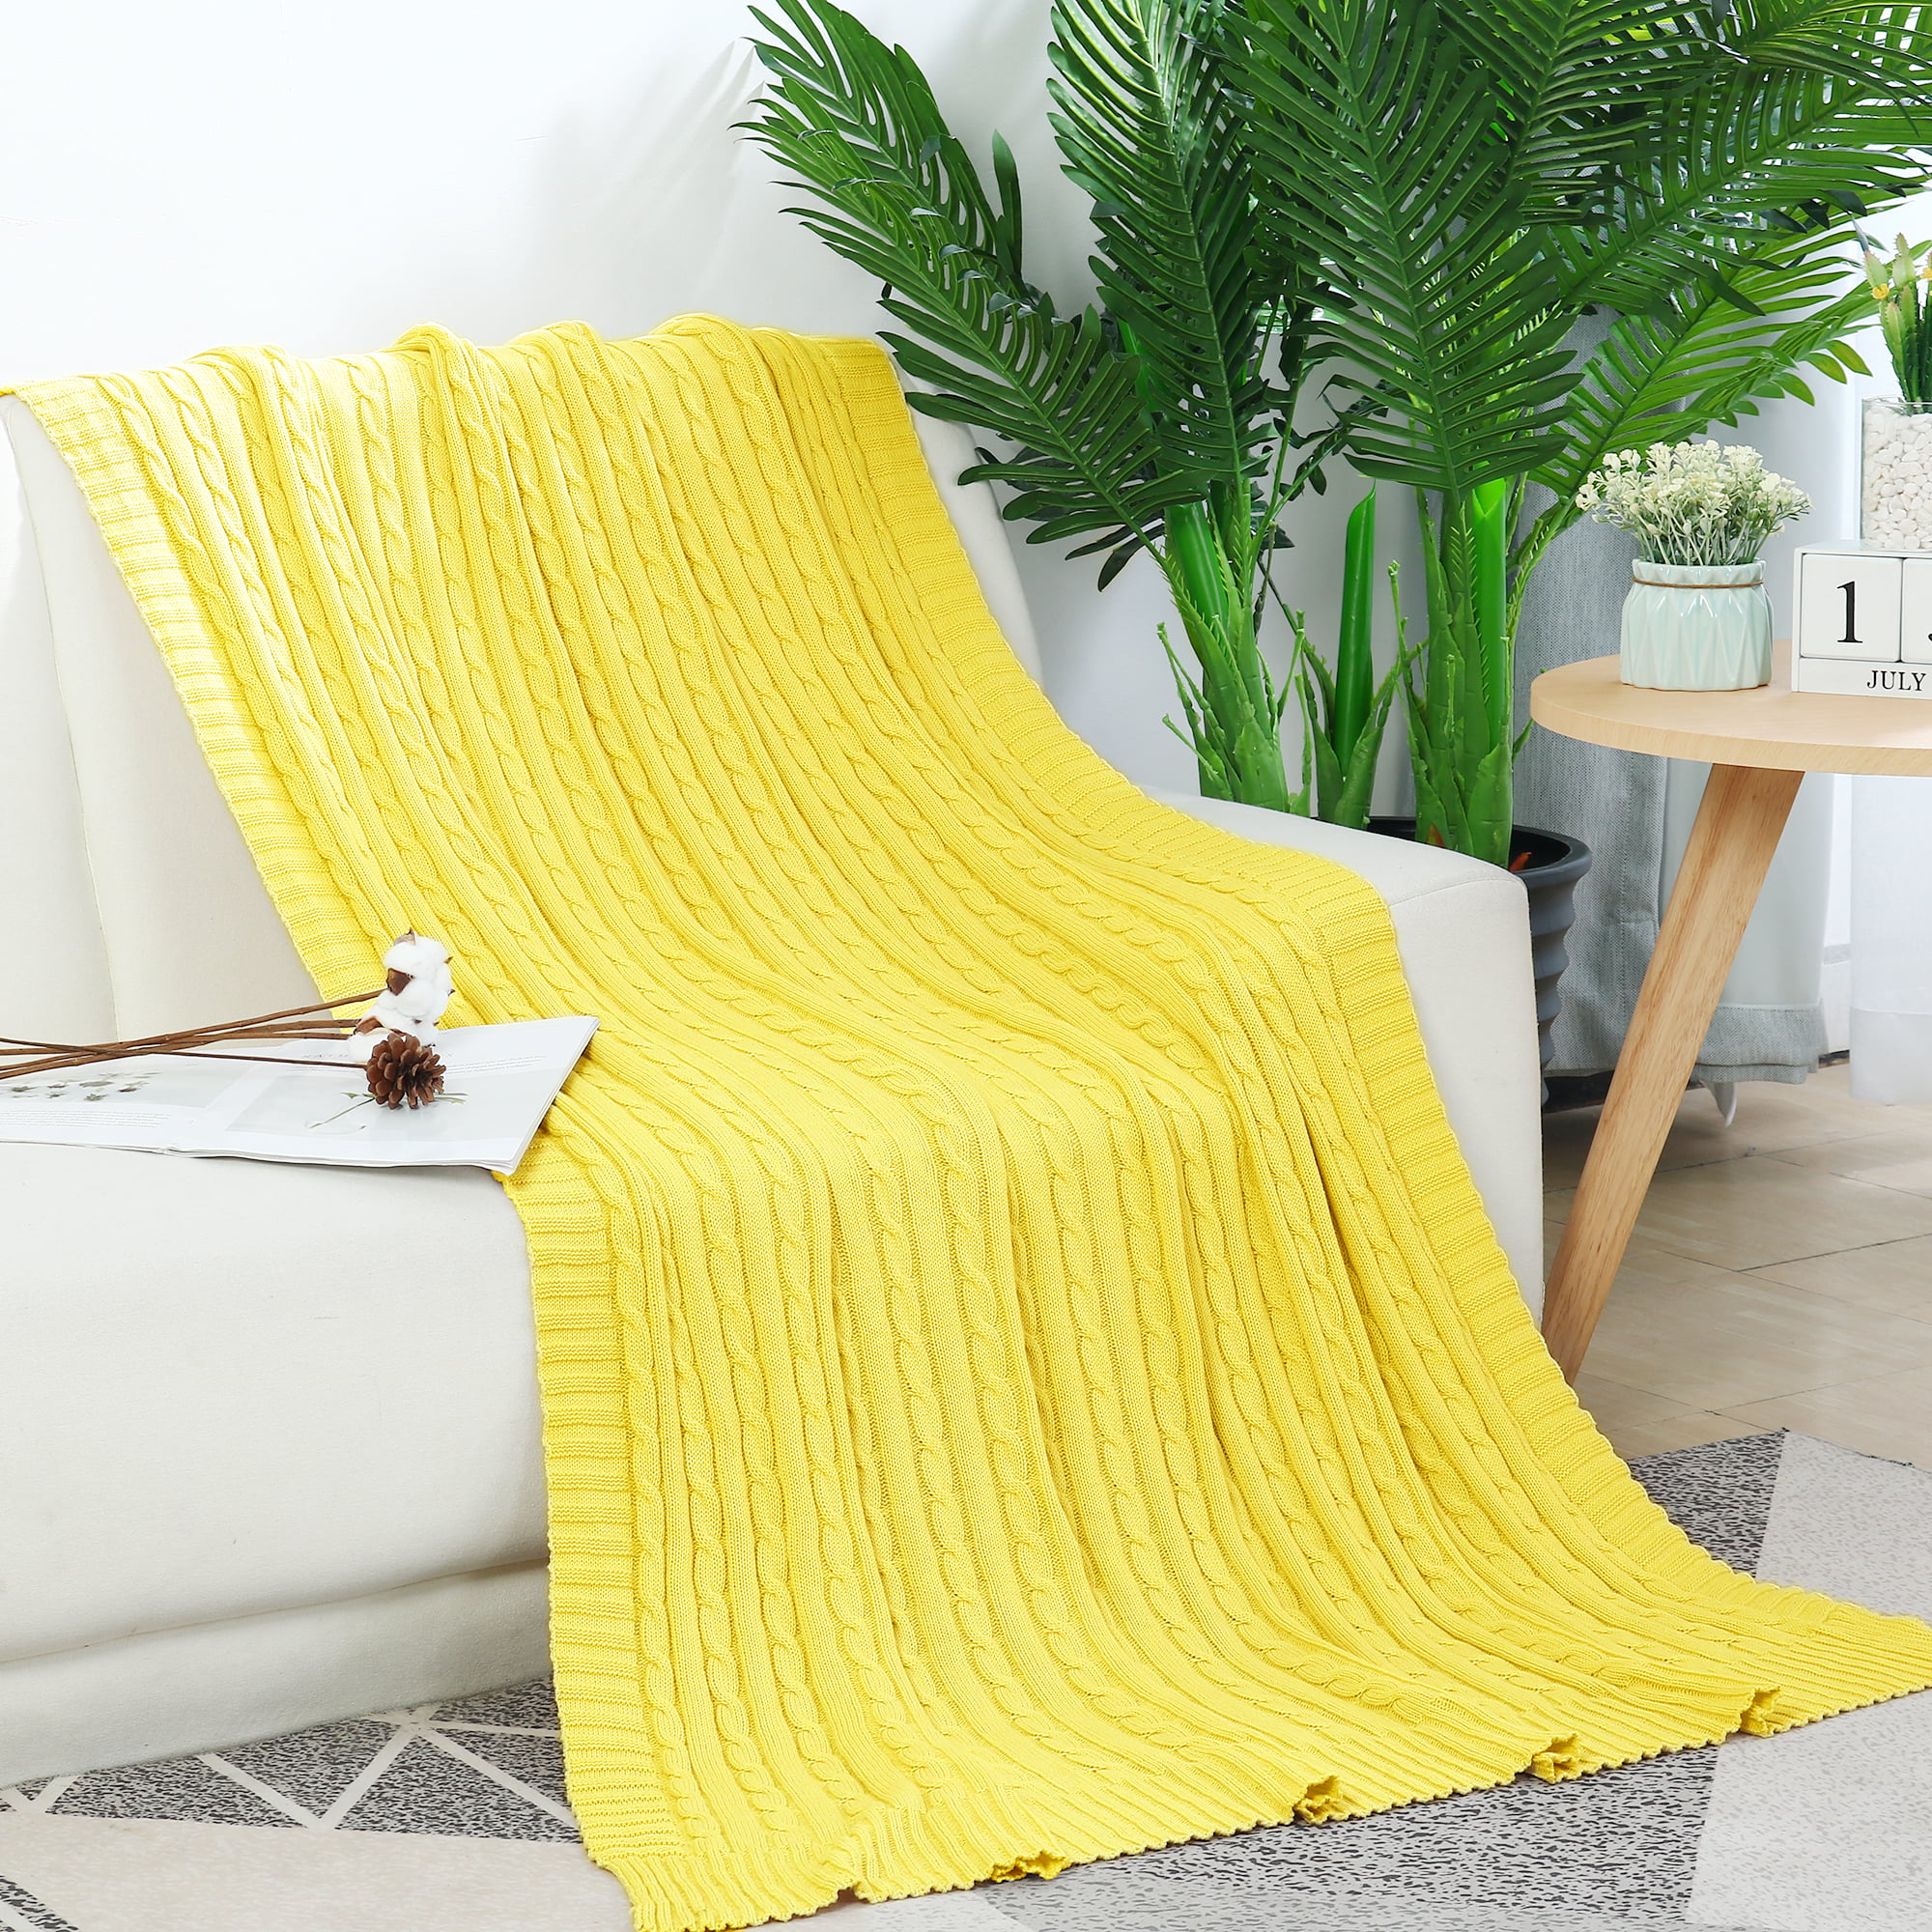 Yellow throws and blankets